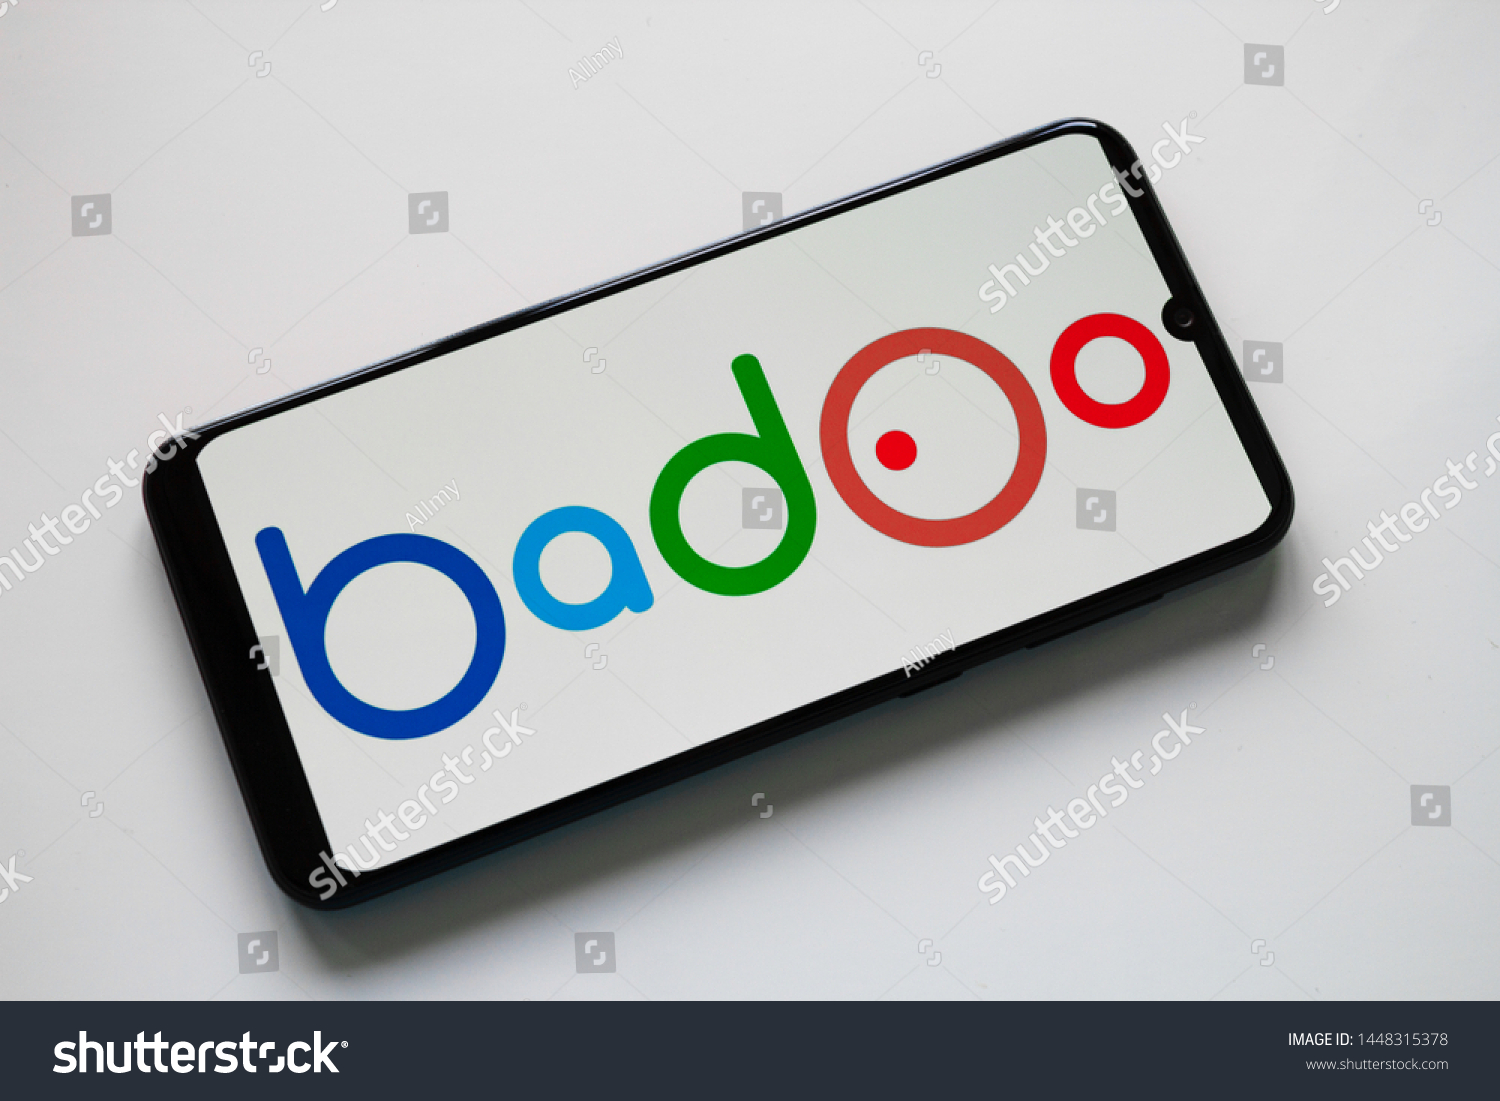 Use how badoo 2019 to How to